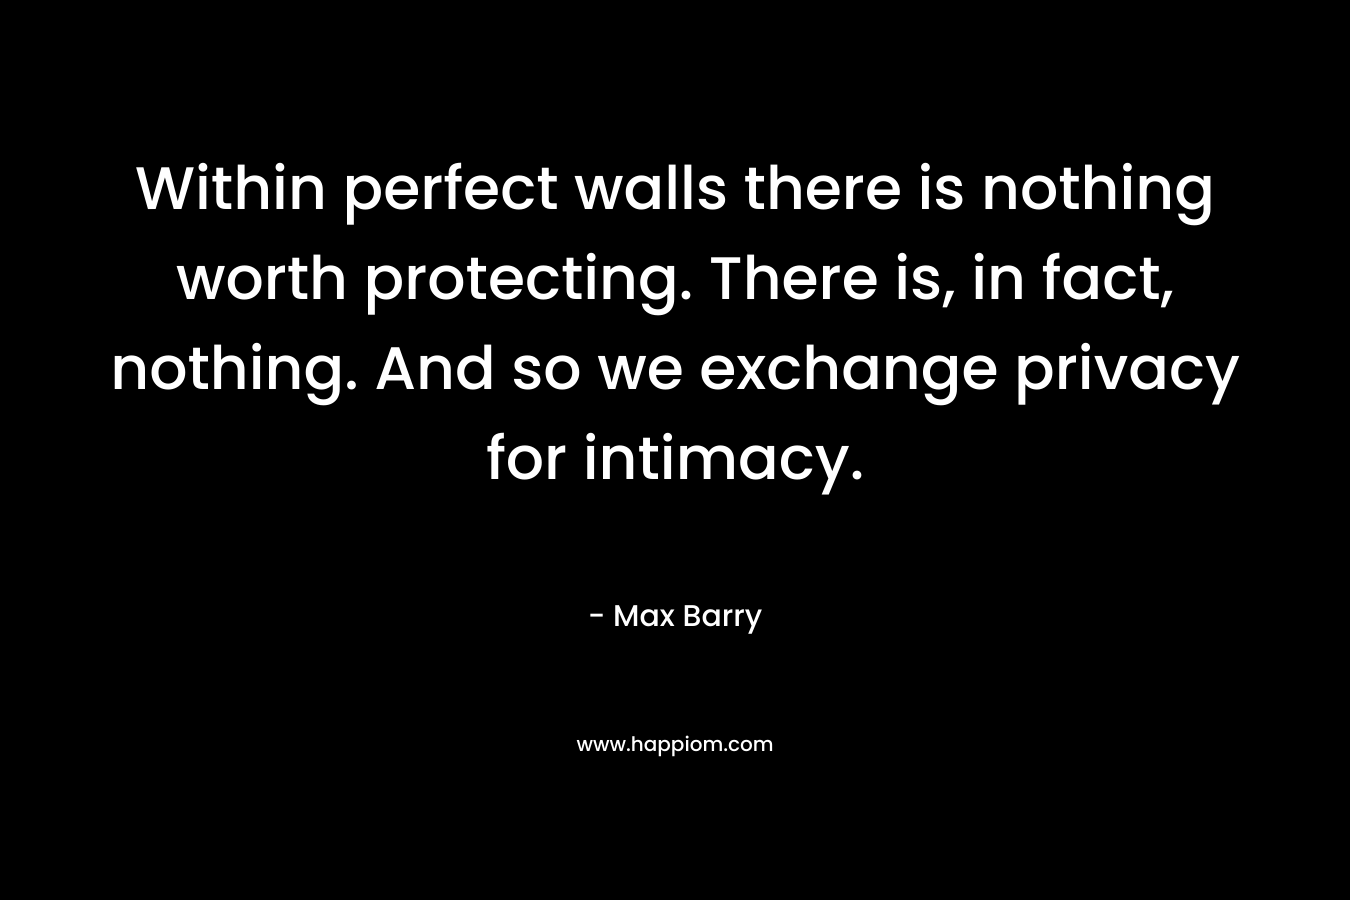 Within perfect walls there is nothing worth protecting. There is, in fact, nothing. And so we exchange privacy for intimacy. – Max Barry